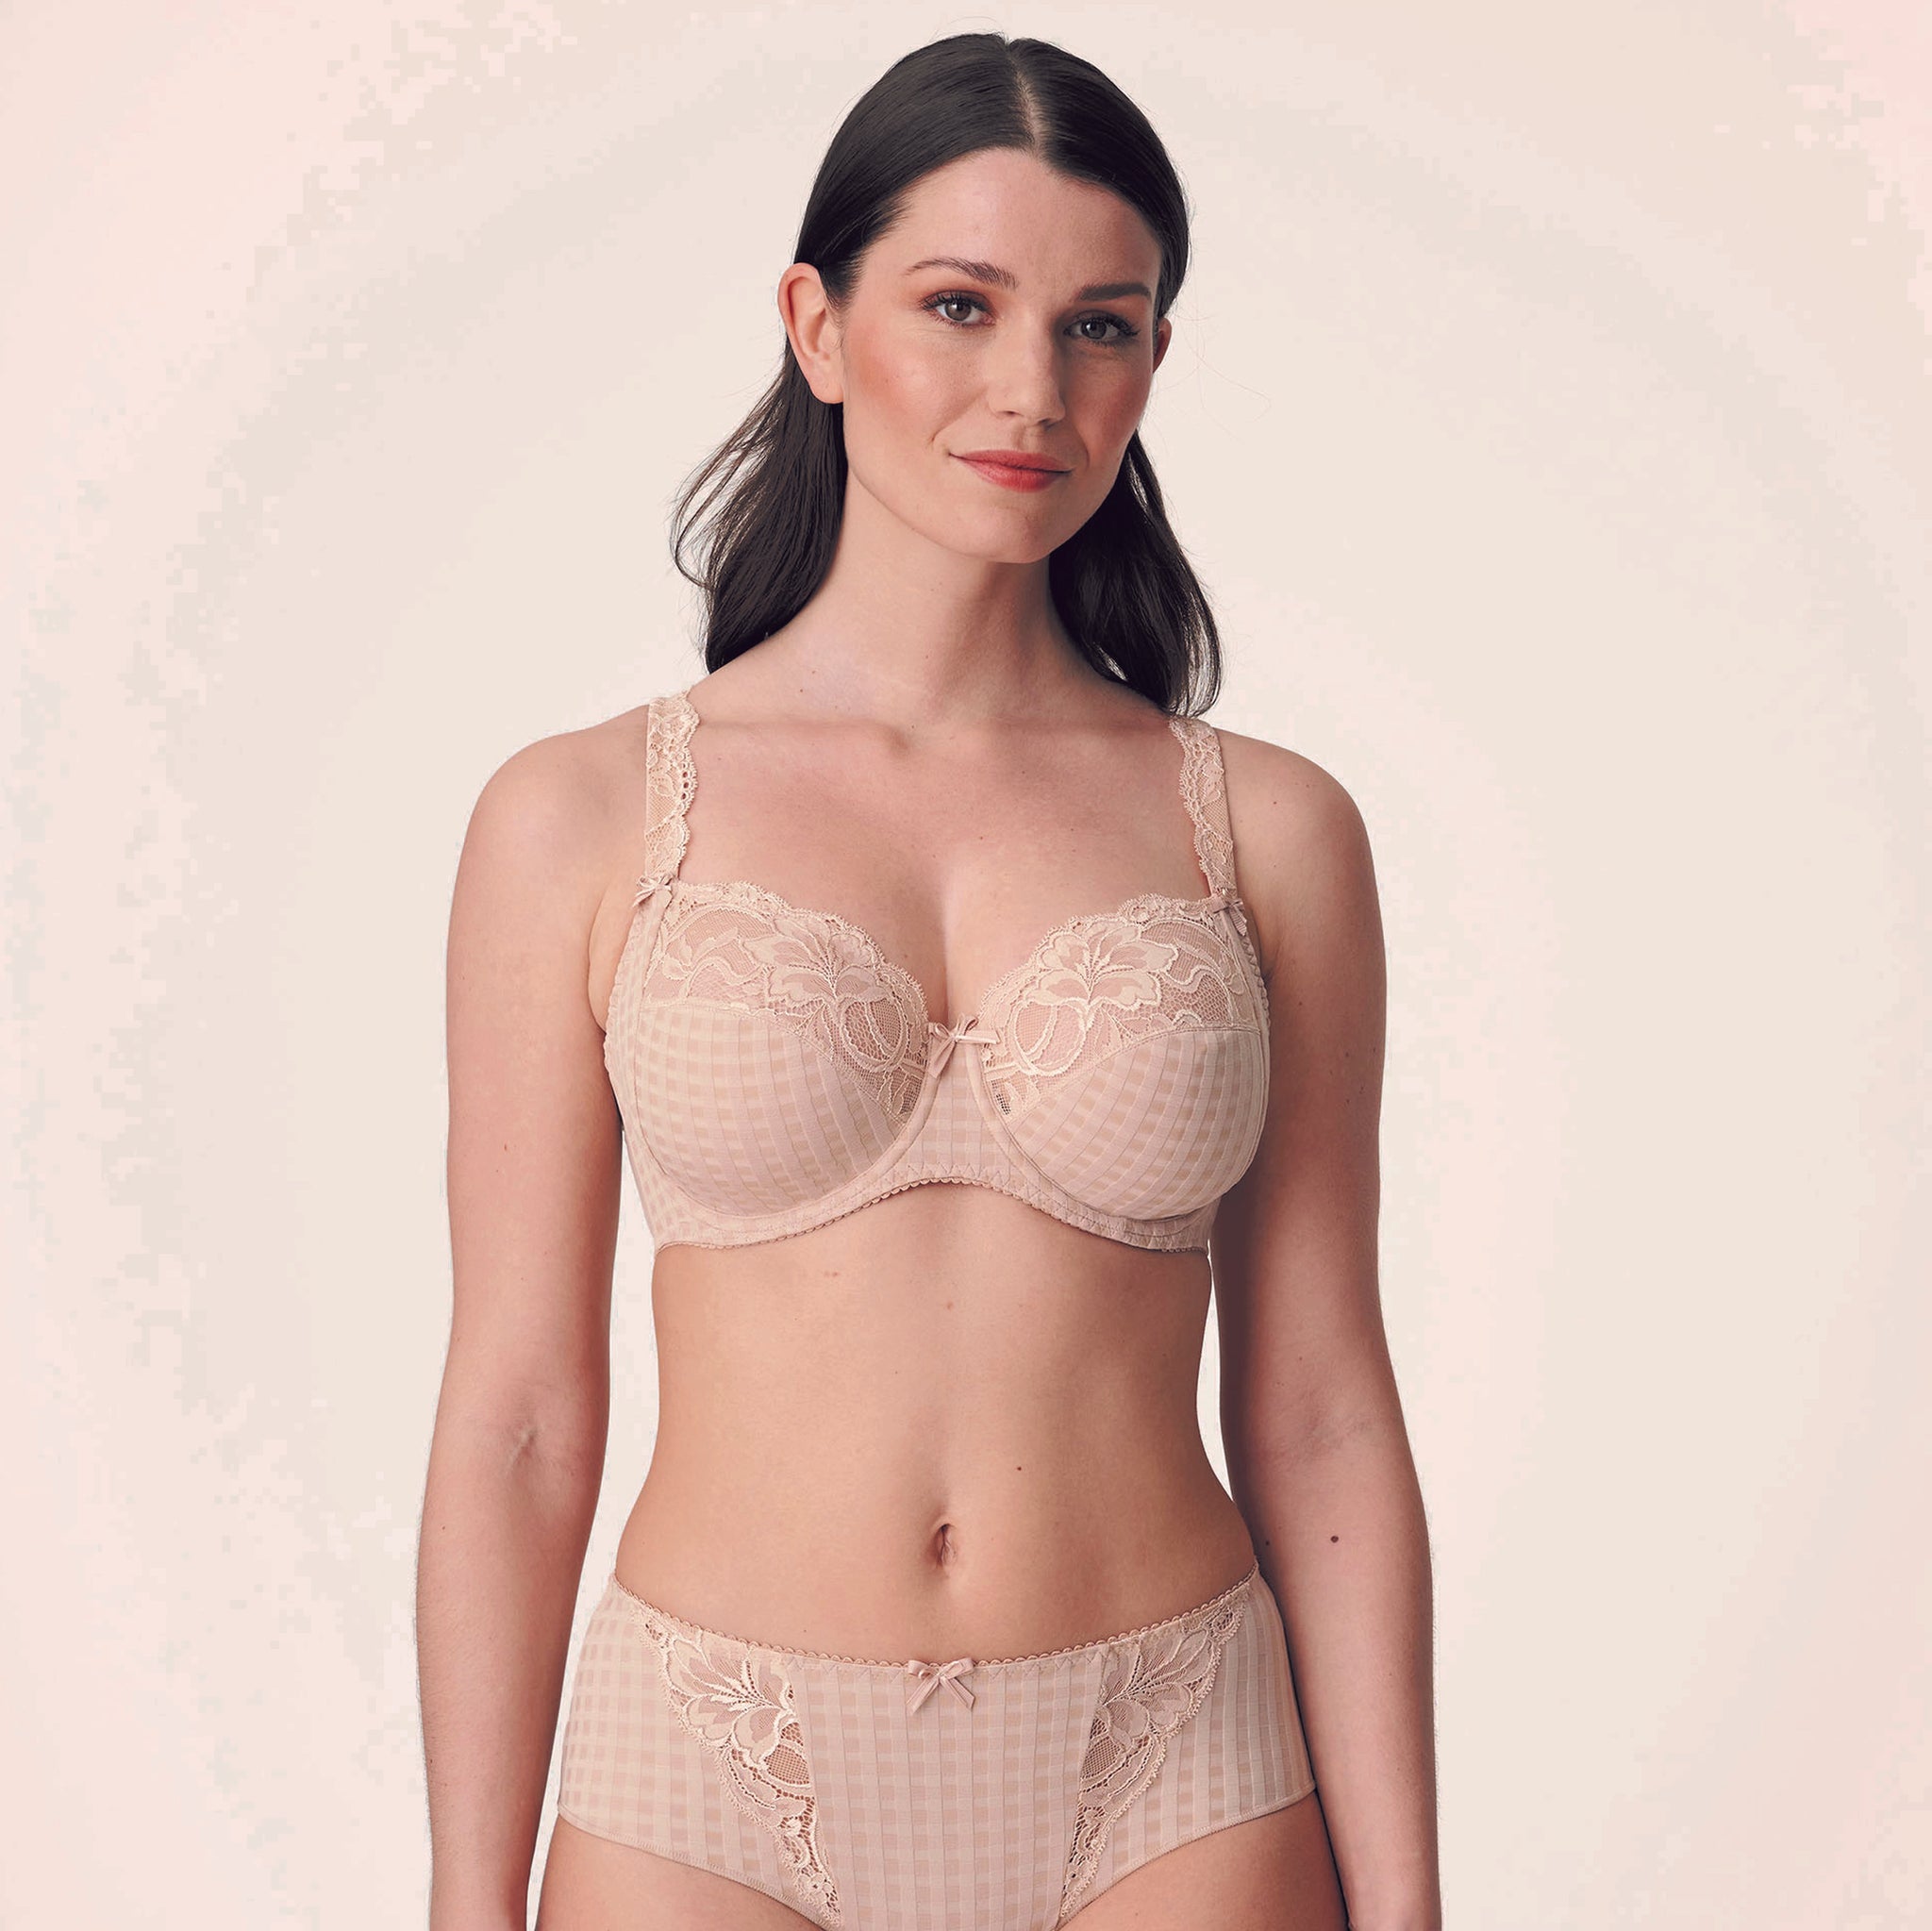 Vicanie's The Bra Fitting Specialists - If you thought the